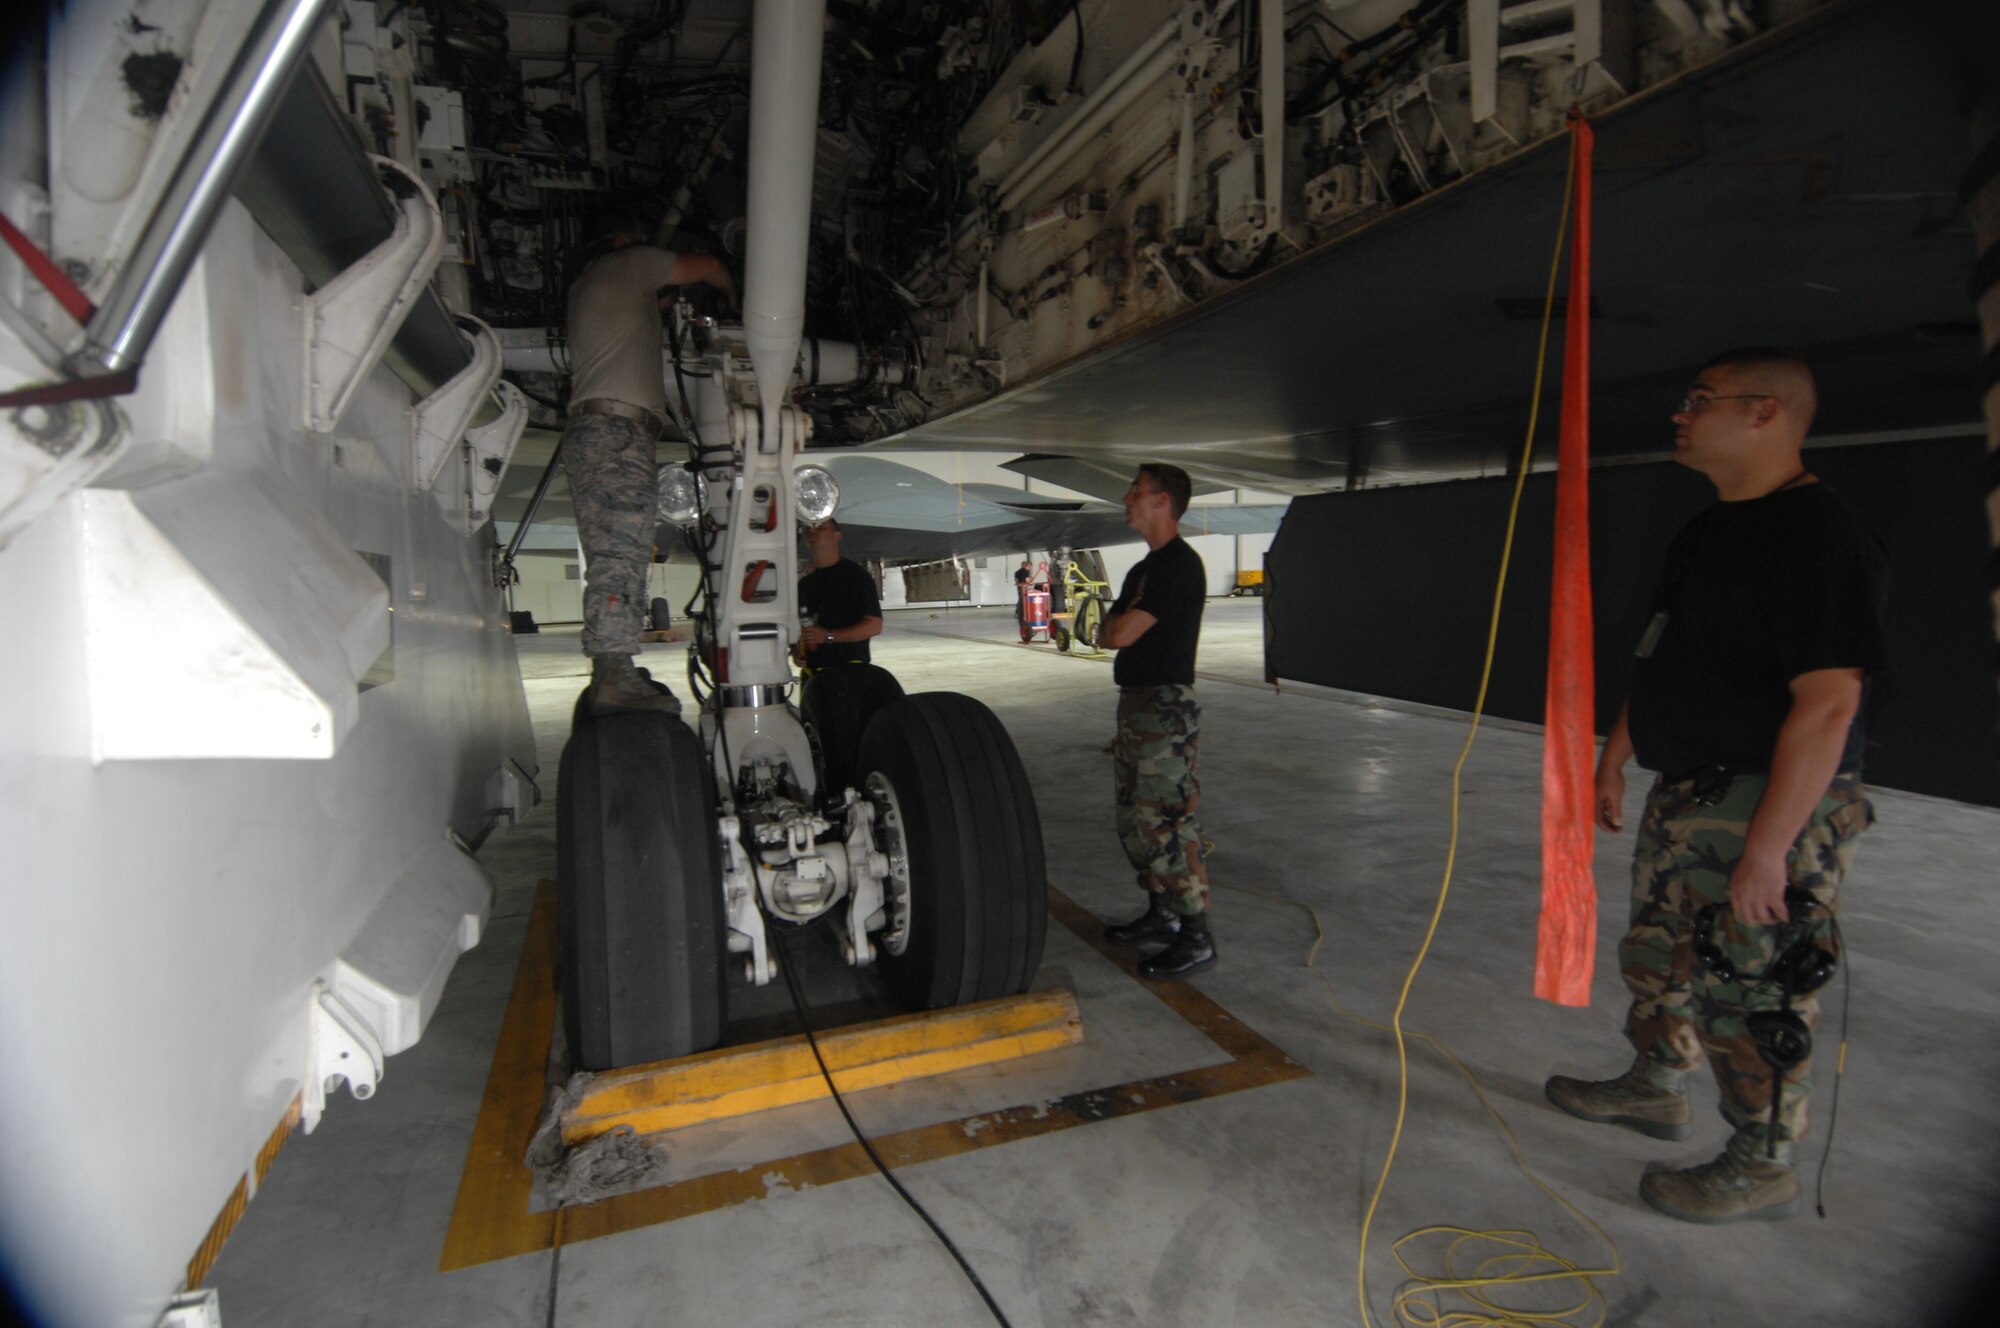 ANDERSEN AIR FORCE BASE, Guam - Airman from the 36th Expeditionary Aircraft Maintenance Squadron perform a routine pre-flight maintenance on a B-2 Spirit stealth bomber. The Airmen are part of a maintenance team supporting the remaining B-2 Spirits at Andersen AFB. Keeping the B-2 Spirit bomber at a mission-ready status requires lots of hard work and a huge team effort by all maintainers working on the multi-role stealth bomber. The B-2s here have remained suspended pending the results from a safety investigation board following the first-ever crash of a stealth bomber Feb. 23 here, at Andersen AFB. The continuous bomber presence demonstrates U.S. commitment to promote security and stability in the Pacific region. The B-2 Spirit Maintenance team is with the 36th EAMXS and is deployed from the 509th Bomb Wing, Whiteman, AFB, Mo. (U.S. Air Force photo by Staff Sgt. Vanessa Valentine)
